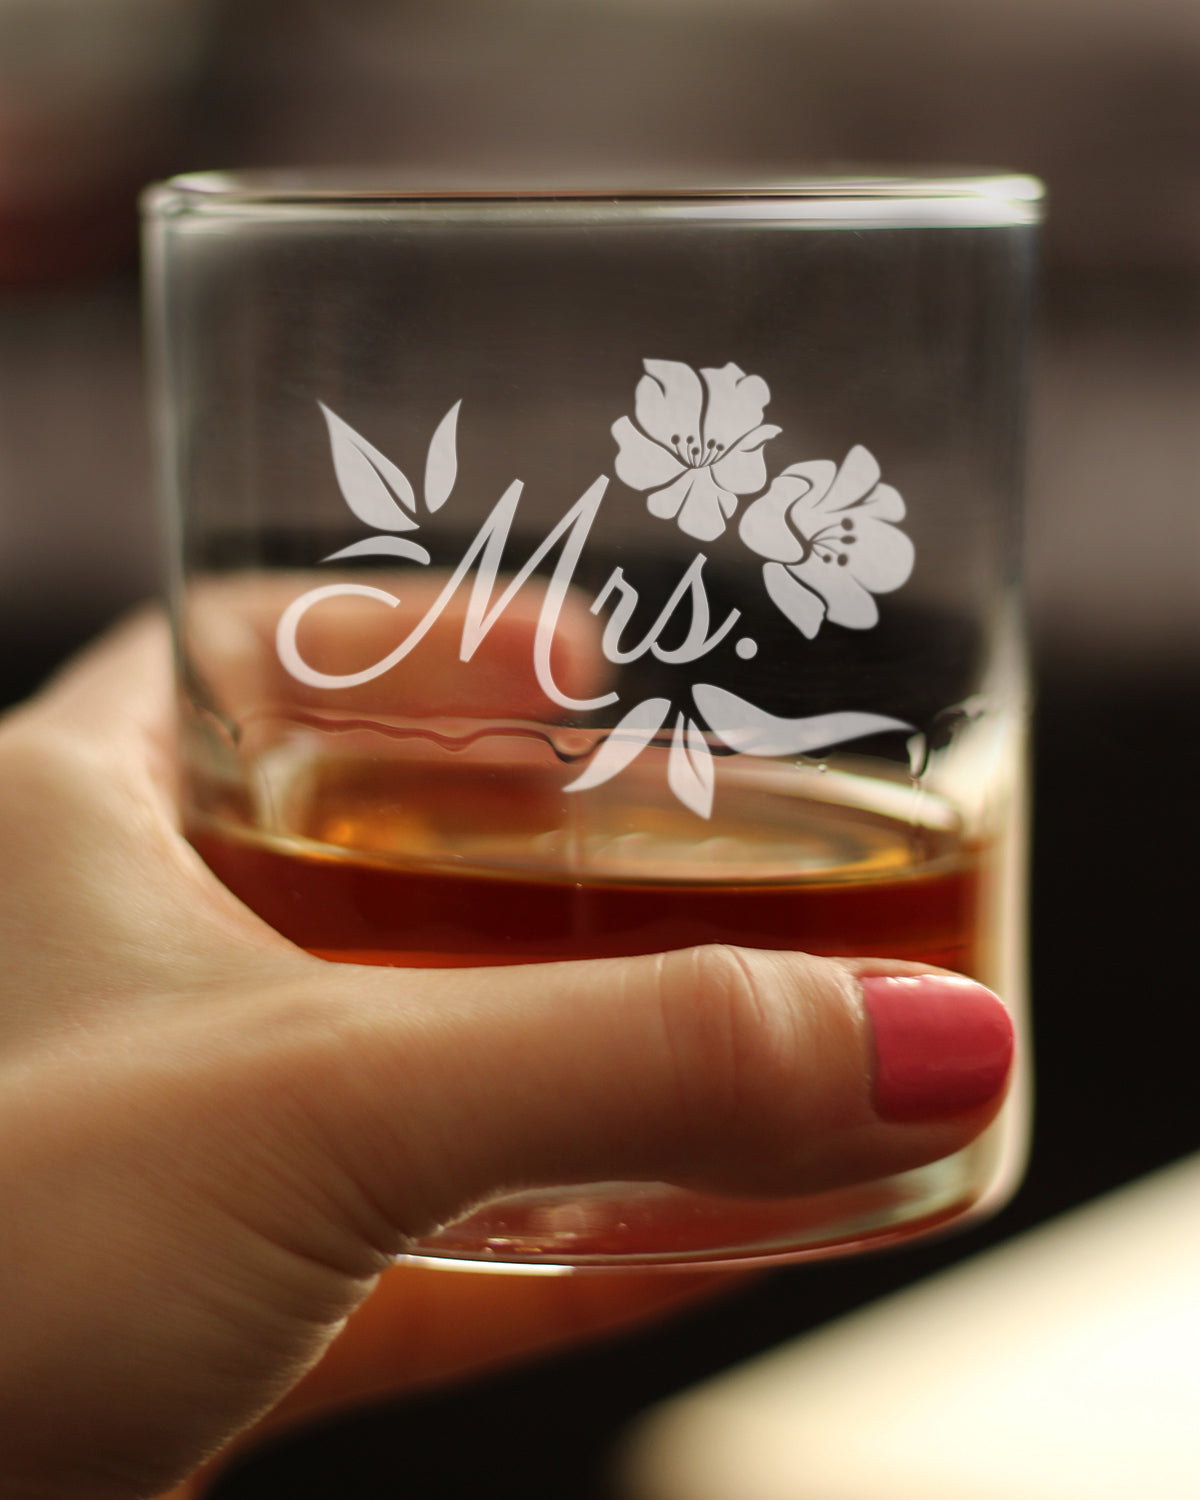 Mrs. Old Fashioned Rocks Glass - Unique Wedding Gift for Bride - Cute Engraved Wedding Cup Gift